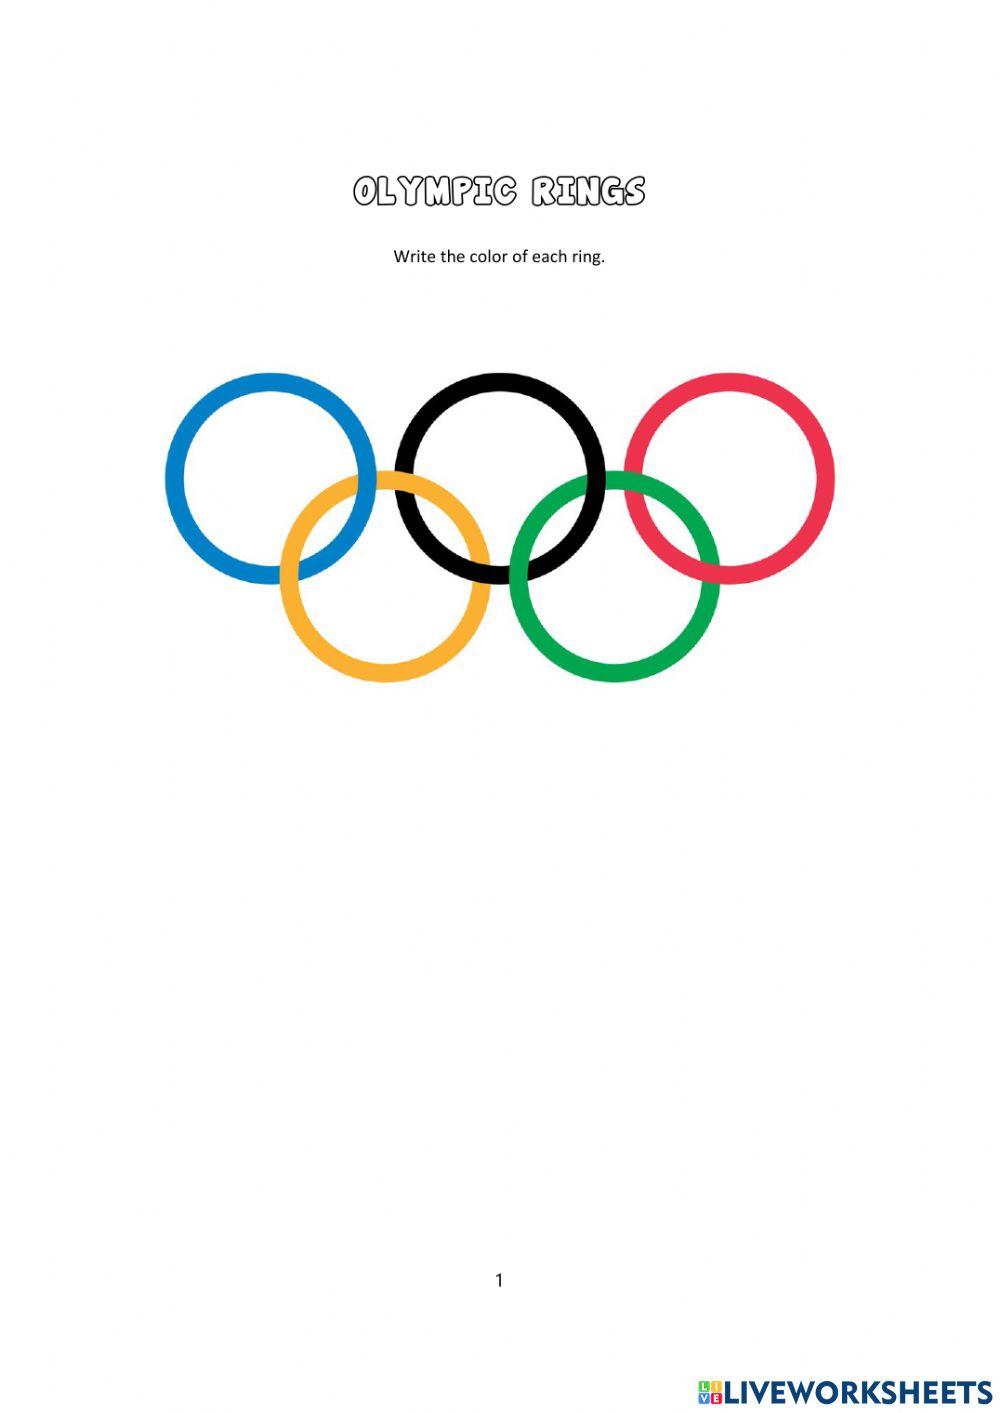 Evolving the Olympic brand